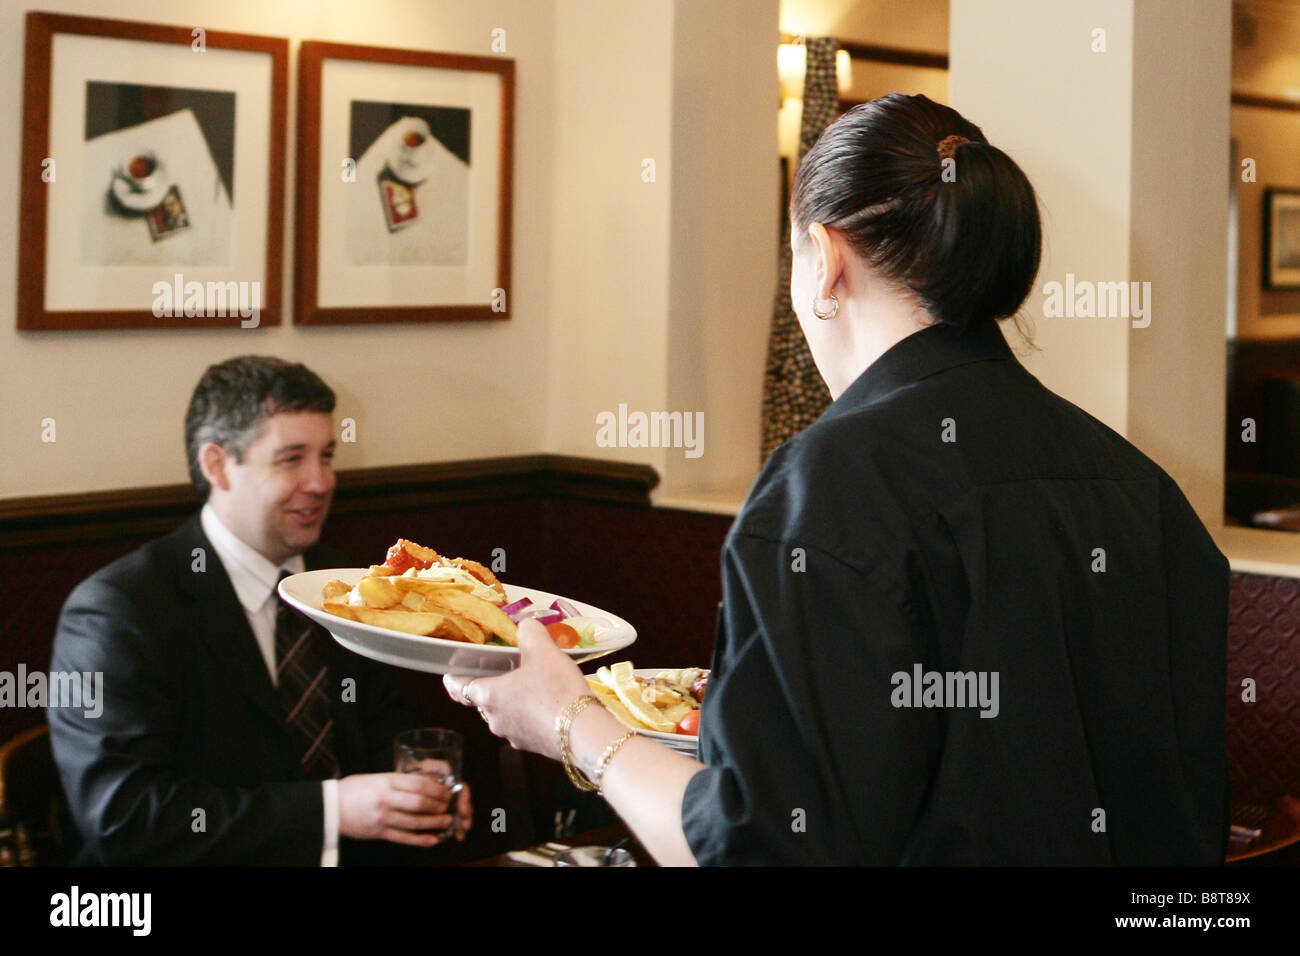 Waitress Serving Food In Bar Stock Photo Alamy